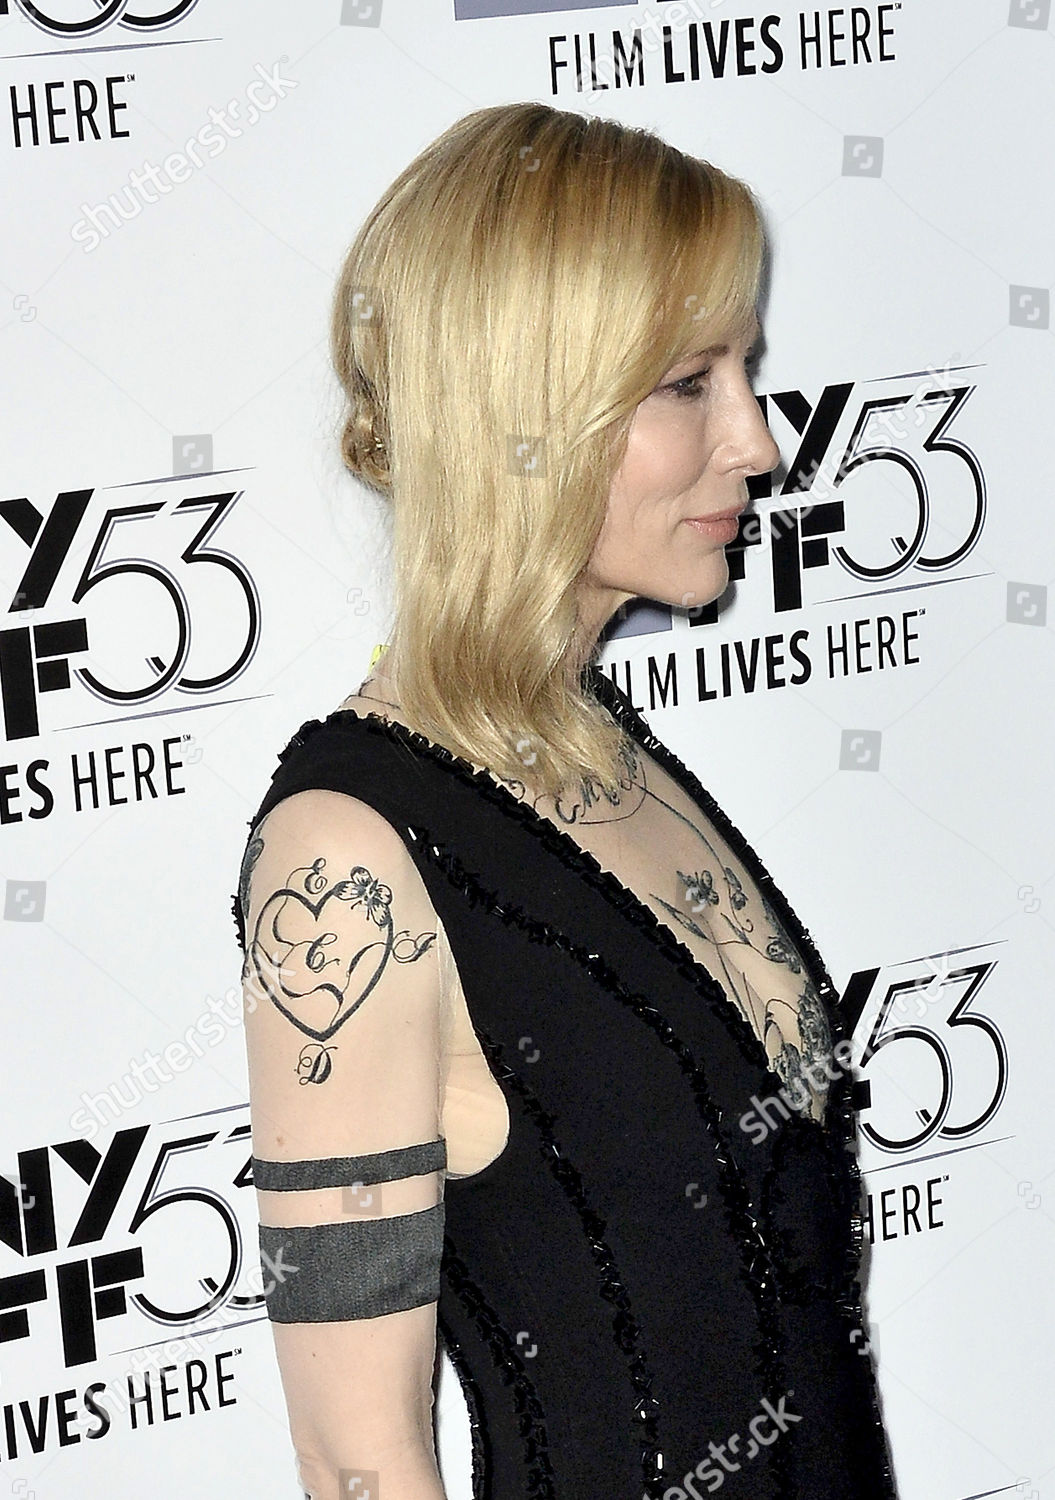 Cate Blanchett and Julia Roberts don formal faux tattoo fashions  Cate  blanchett Julia roberts Fashion